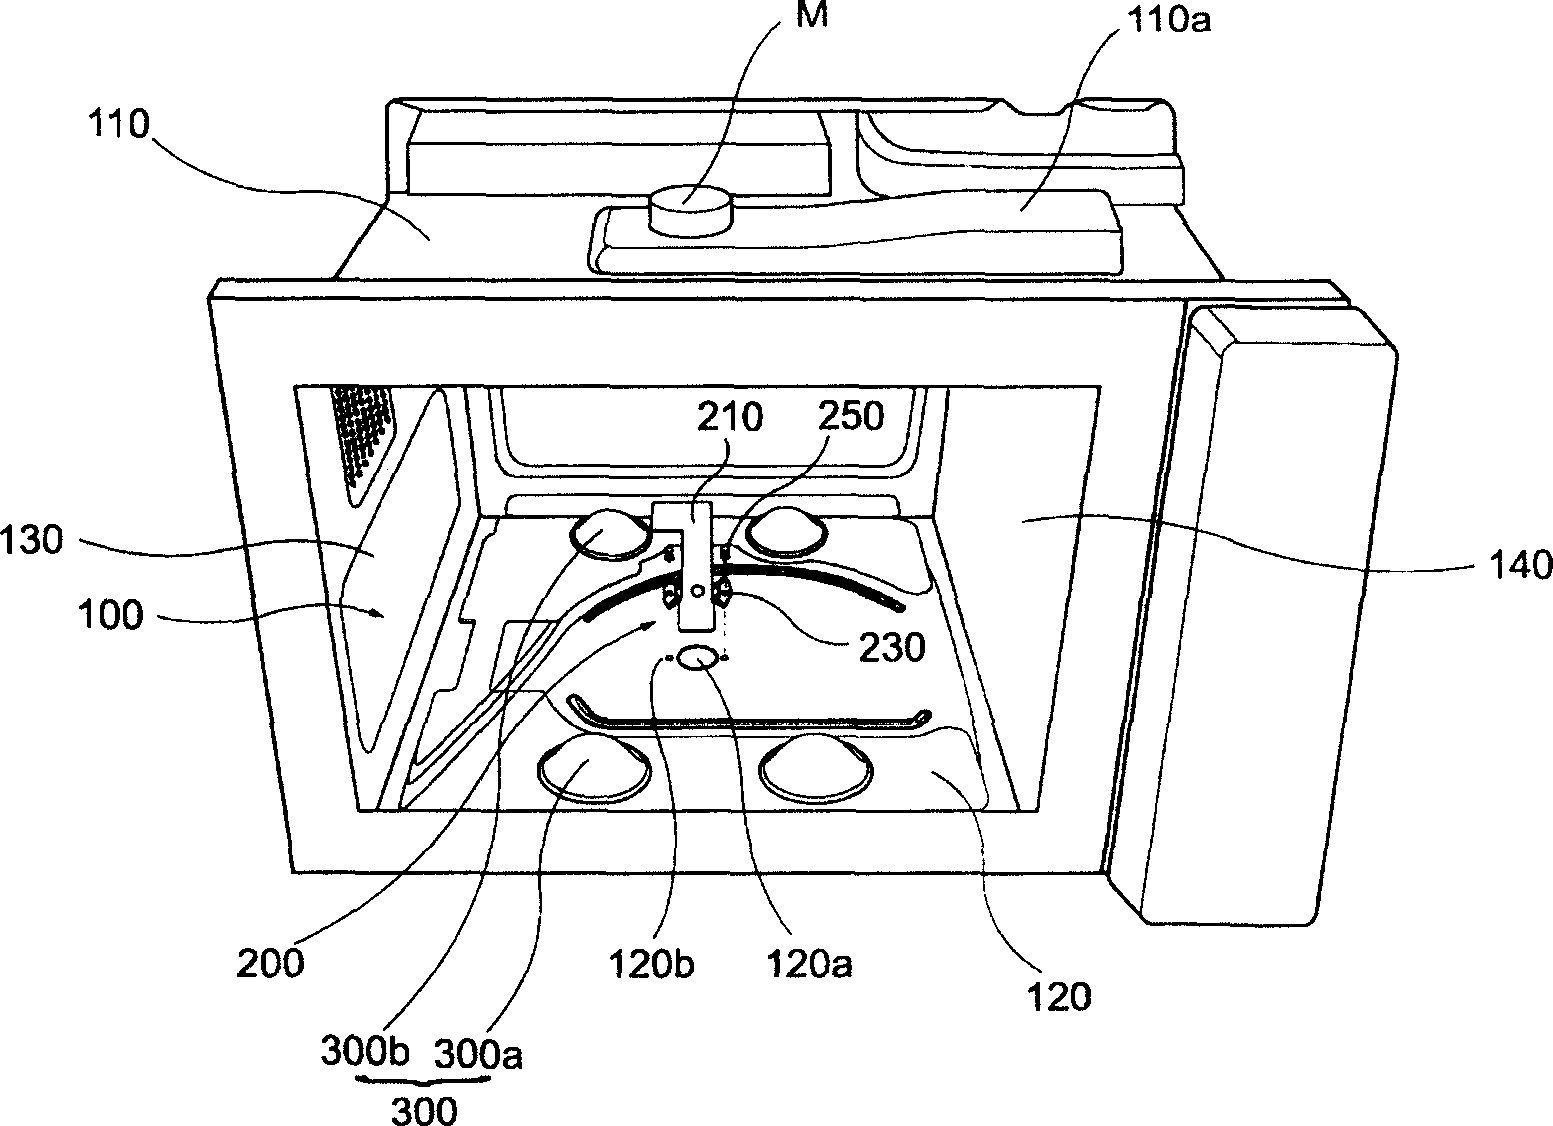 Surface plate structure for bottom of microwave oven chamber